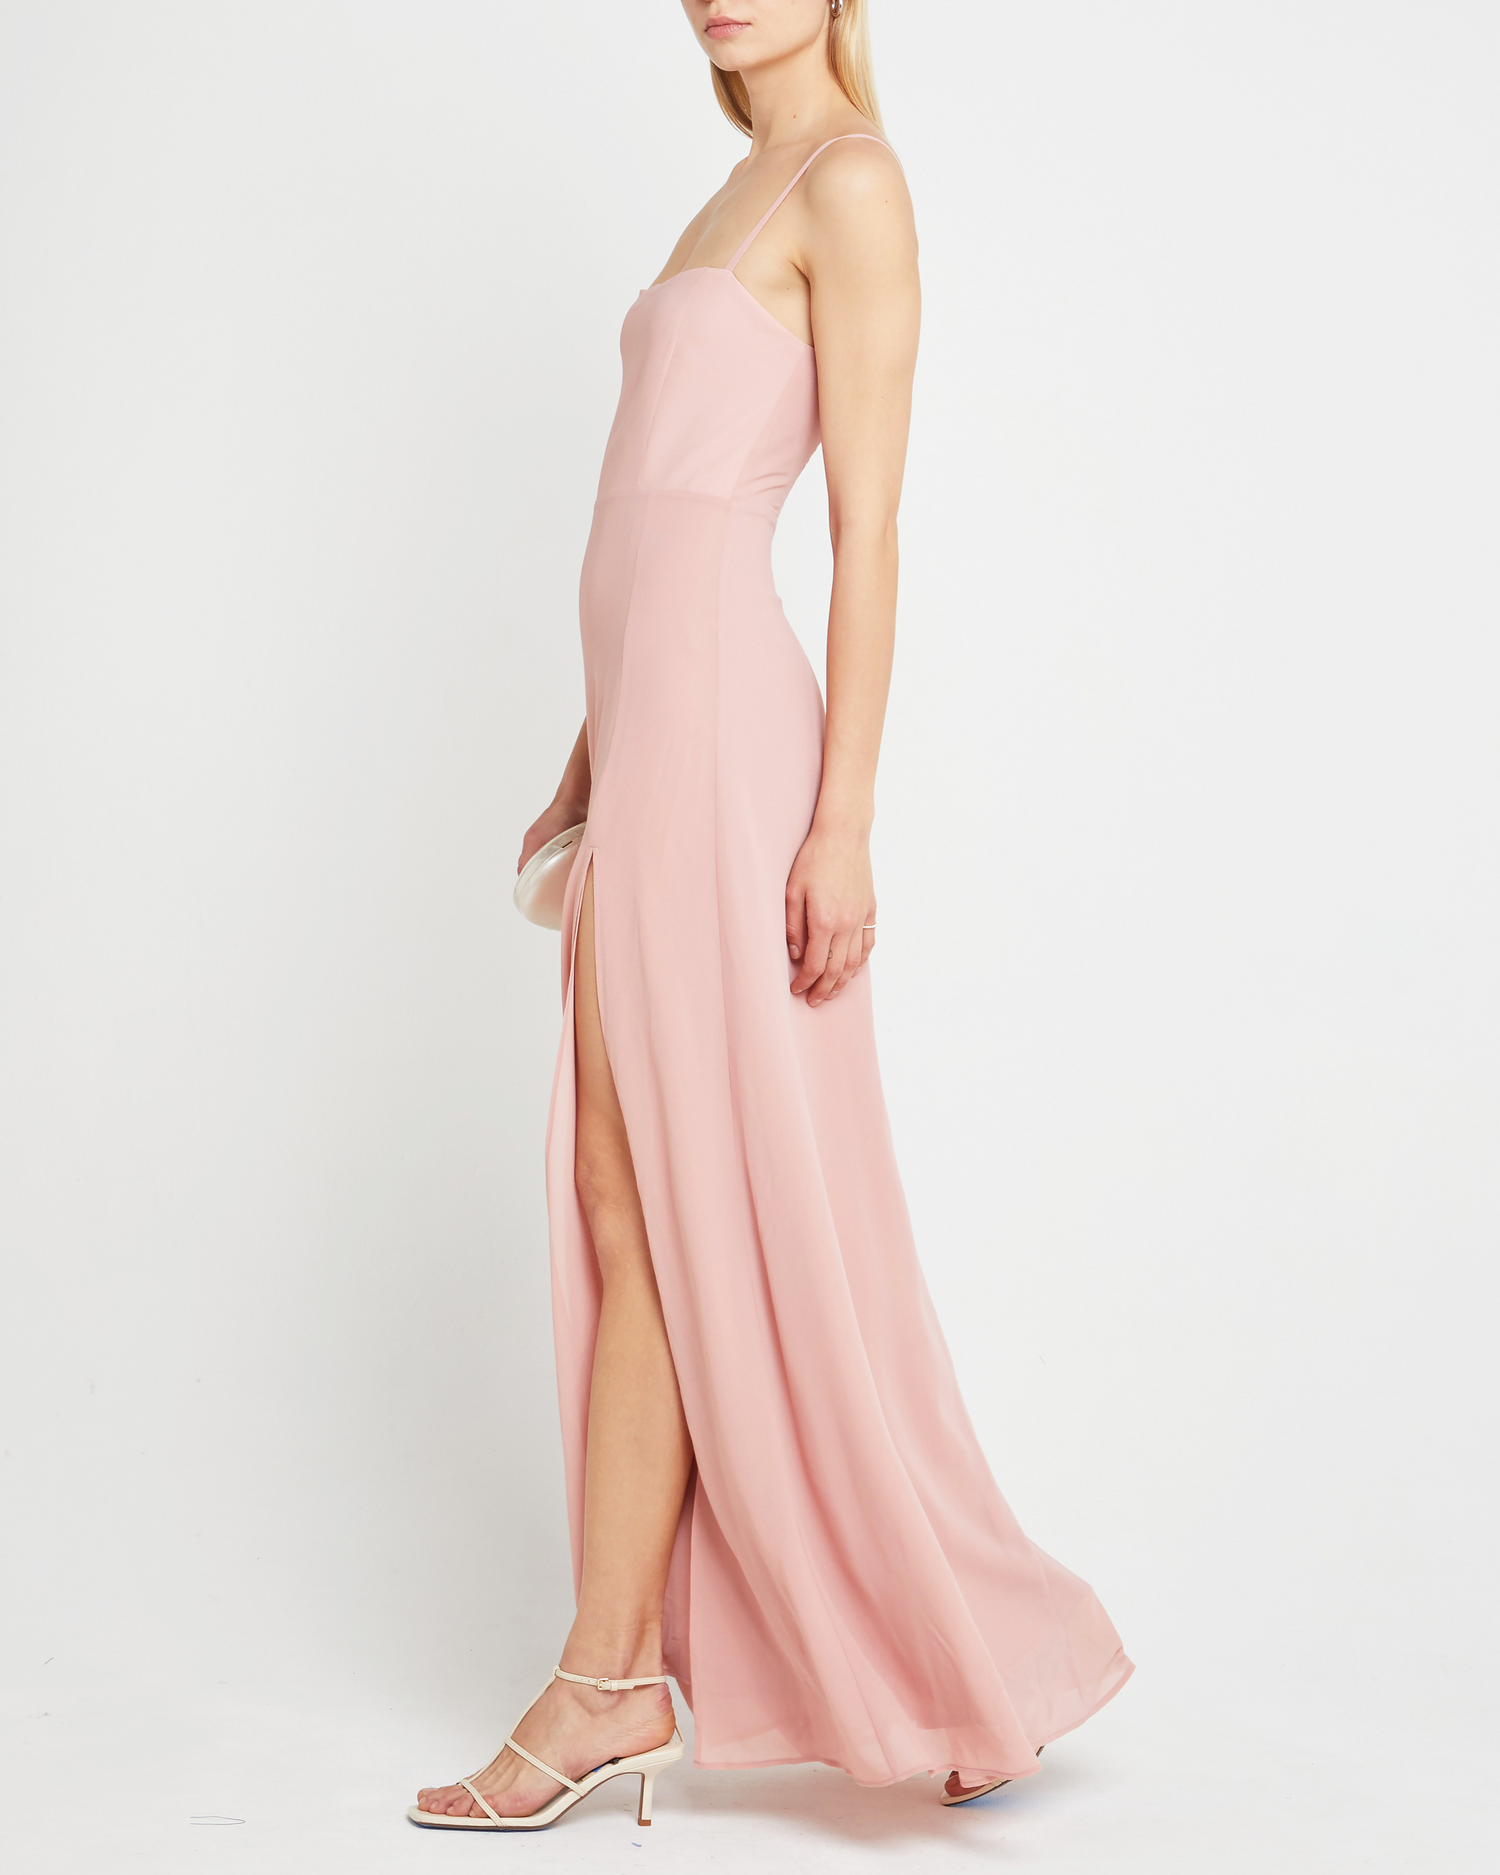 Second image of Jessica Maxi Dress, a pink wedding guest dress with back zipper, straight neckline, side slit, adjustable straps, smocked back detail, and lining